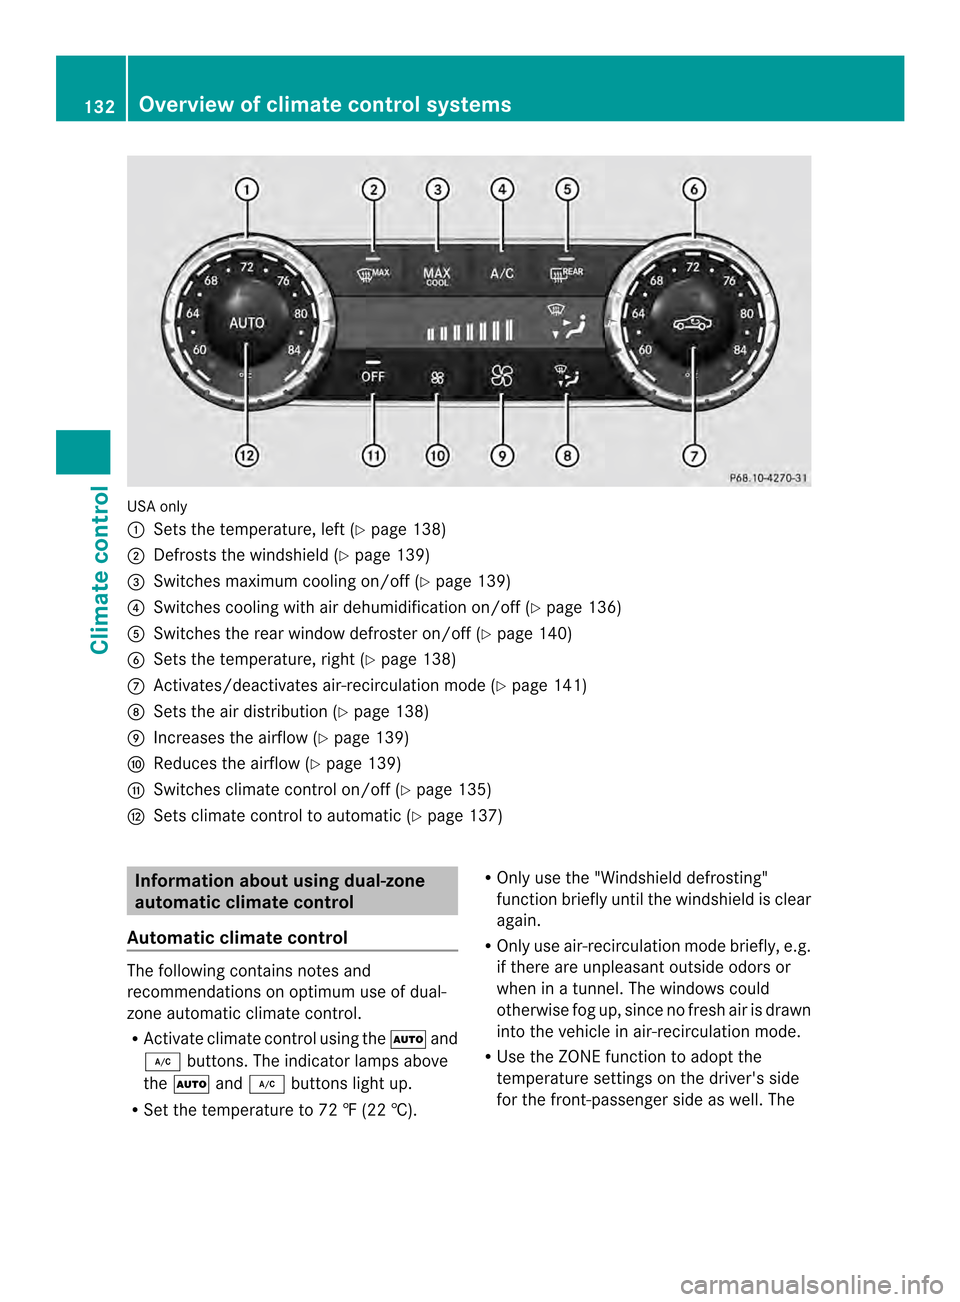 MERCEDES-BENZ CLS-Class 2014 W218 Owners Manual USA only
001A
Sets the temperature, left (Y page 138)
0010 Defrosts the windshield( Ypage 139)
0024 Switches maximum cooling on/off (Y page 139)
0021 Switches cooling with air dehumidification on/off 